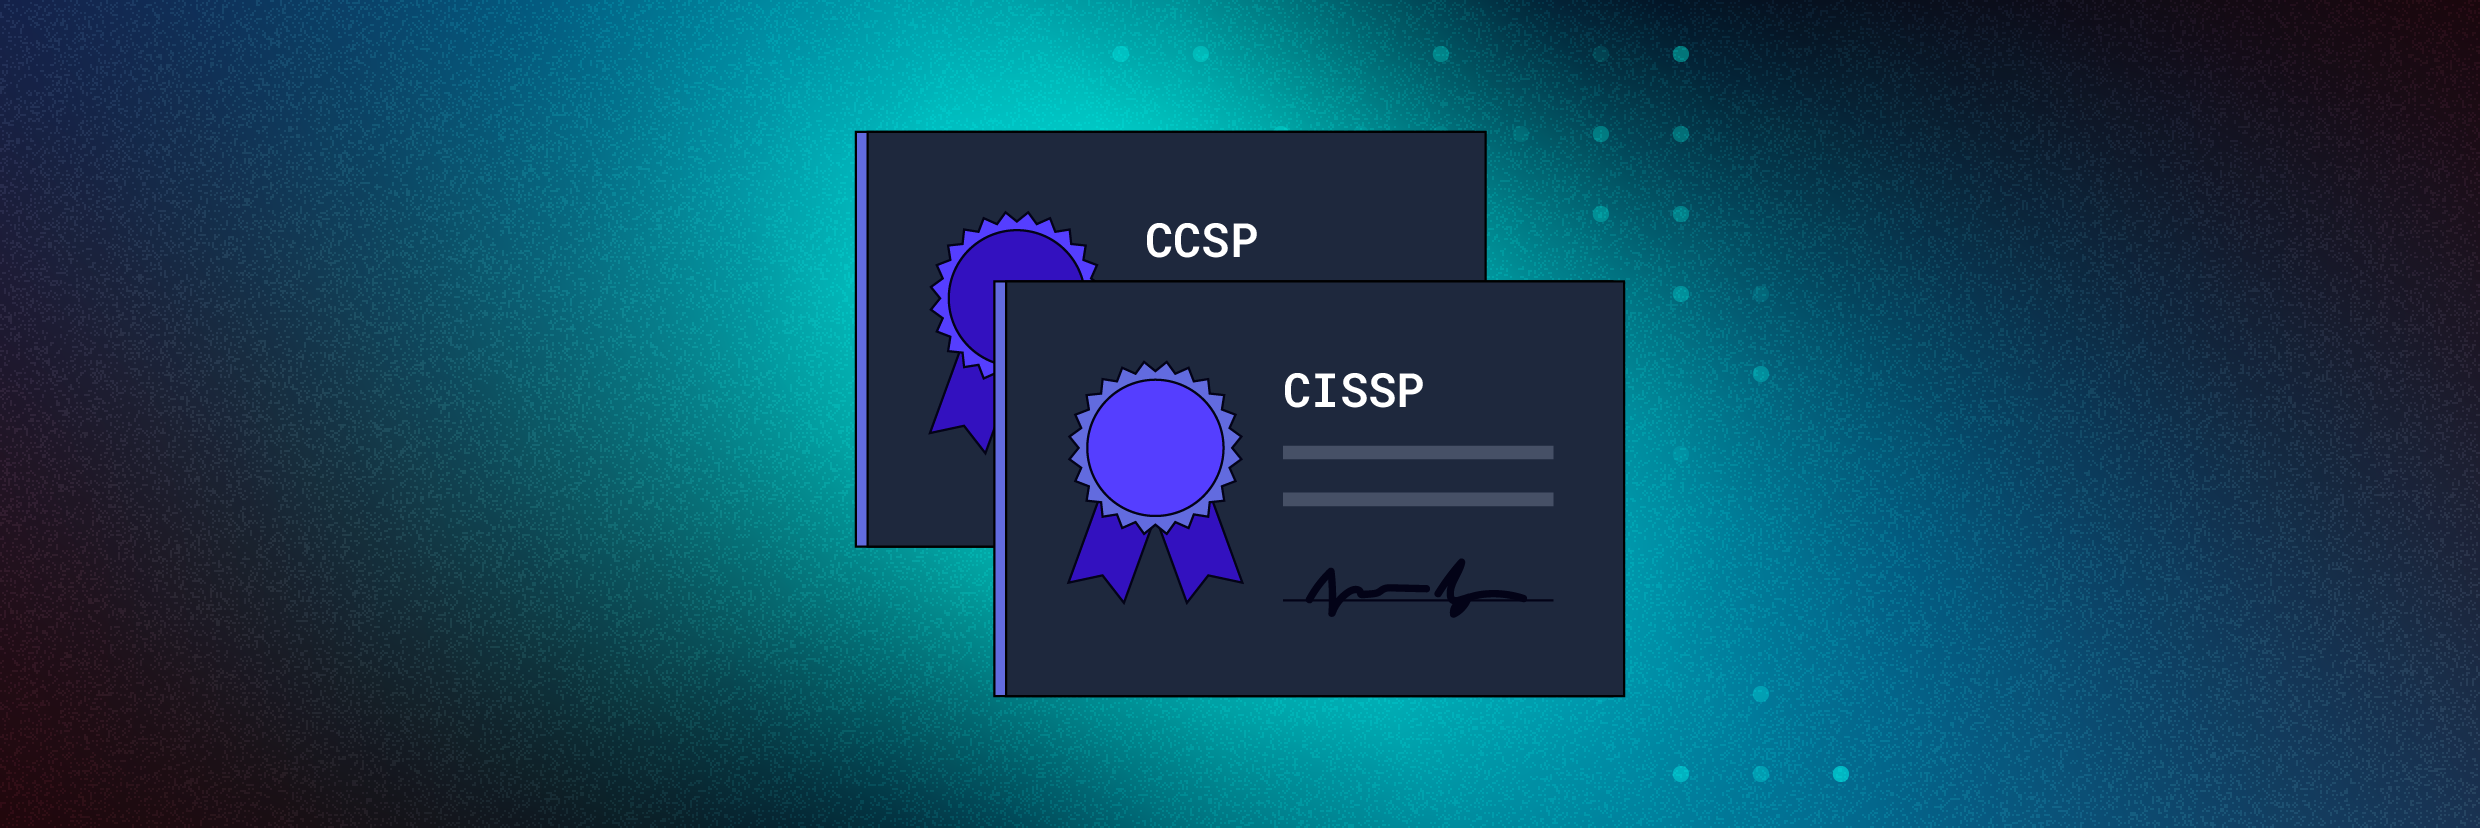 CCSP vs. CISSP: Which One Should You Take?